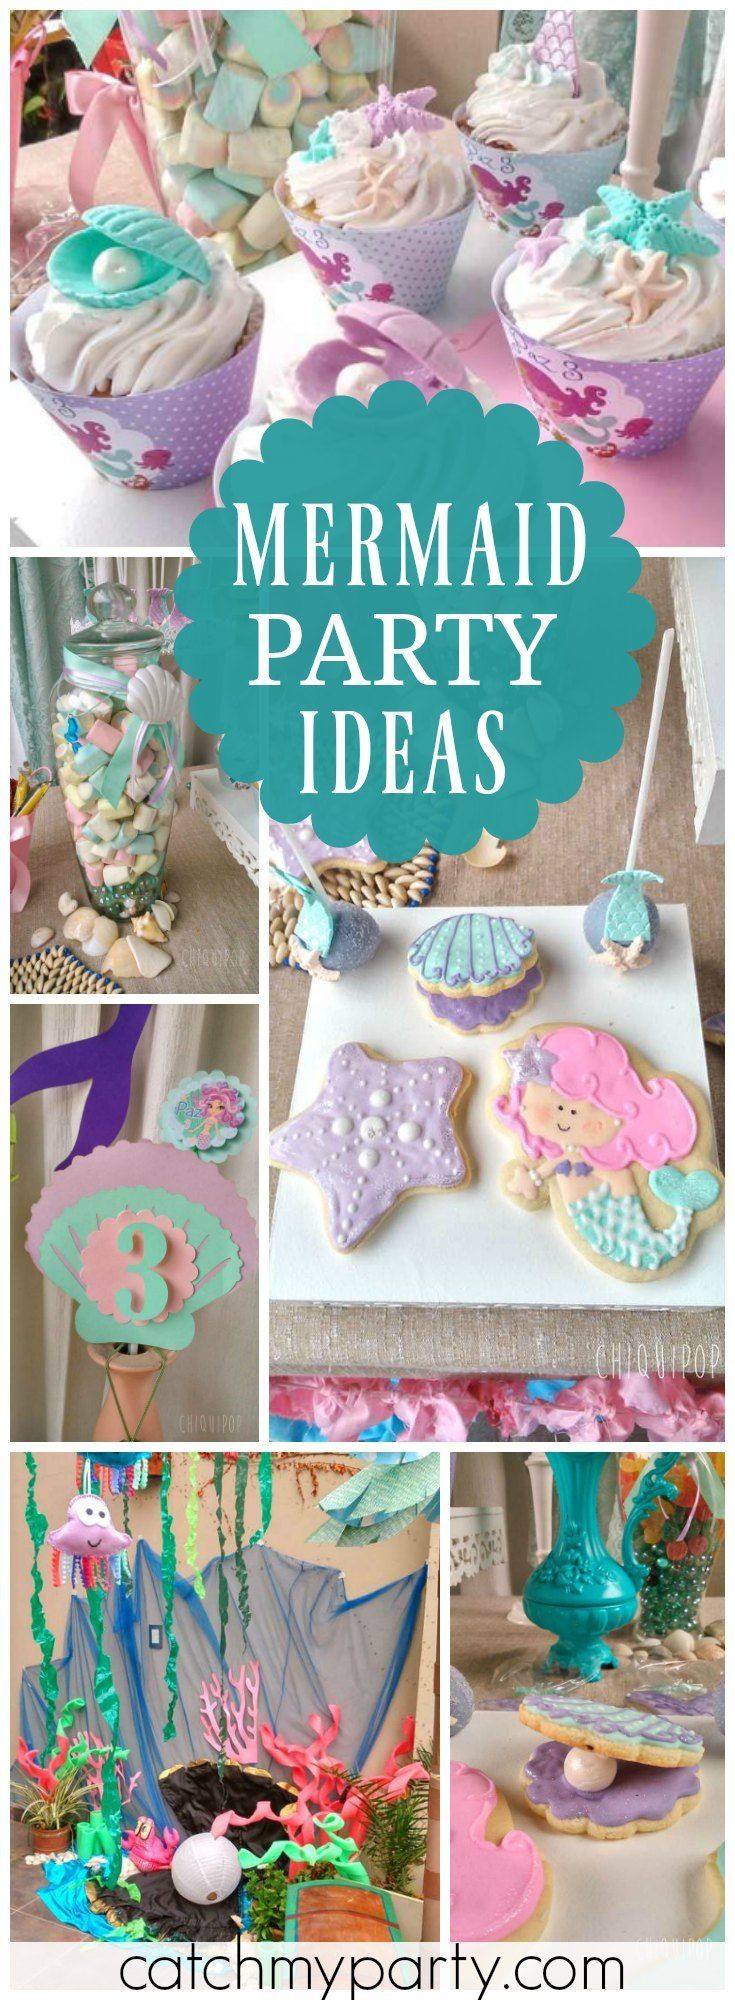 Pinterest Mermaid Party Ideas
 1000 images about Mermaid Party Ideas on Pinterest